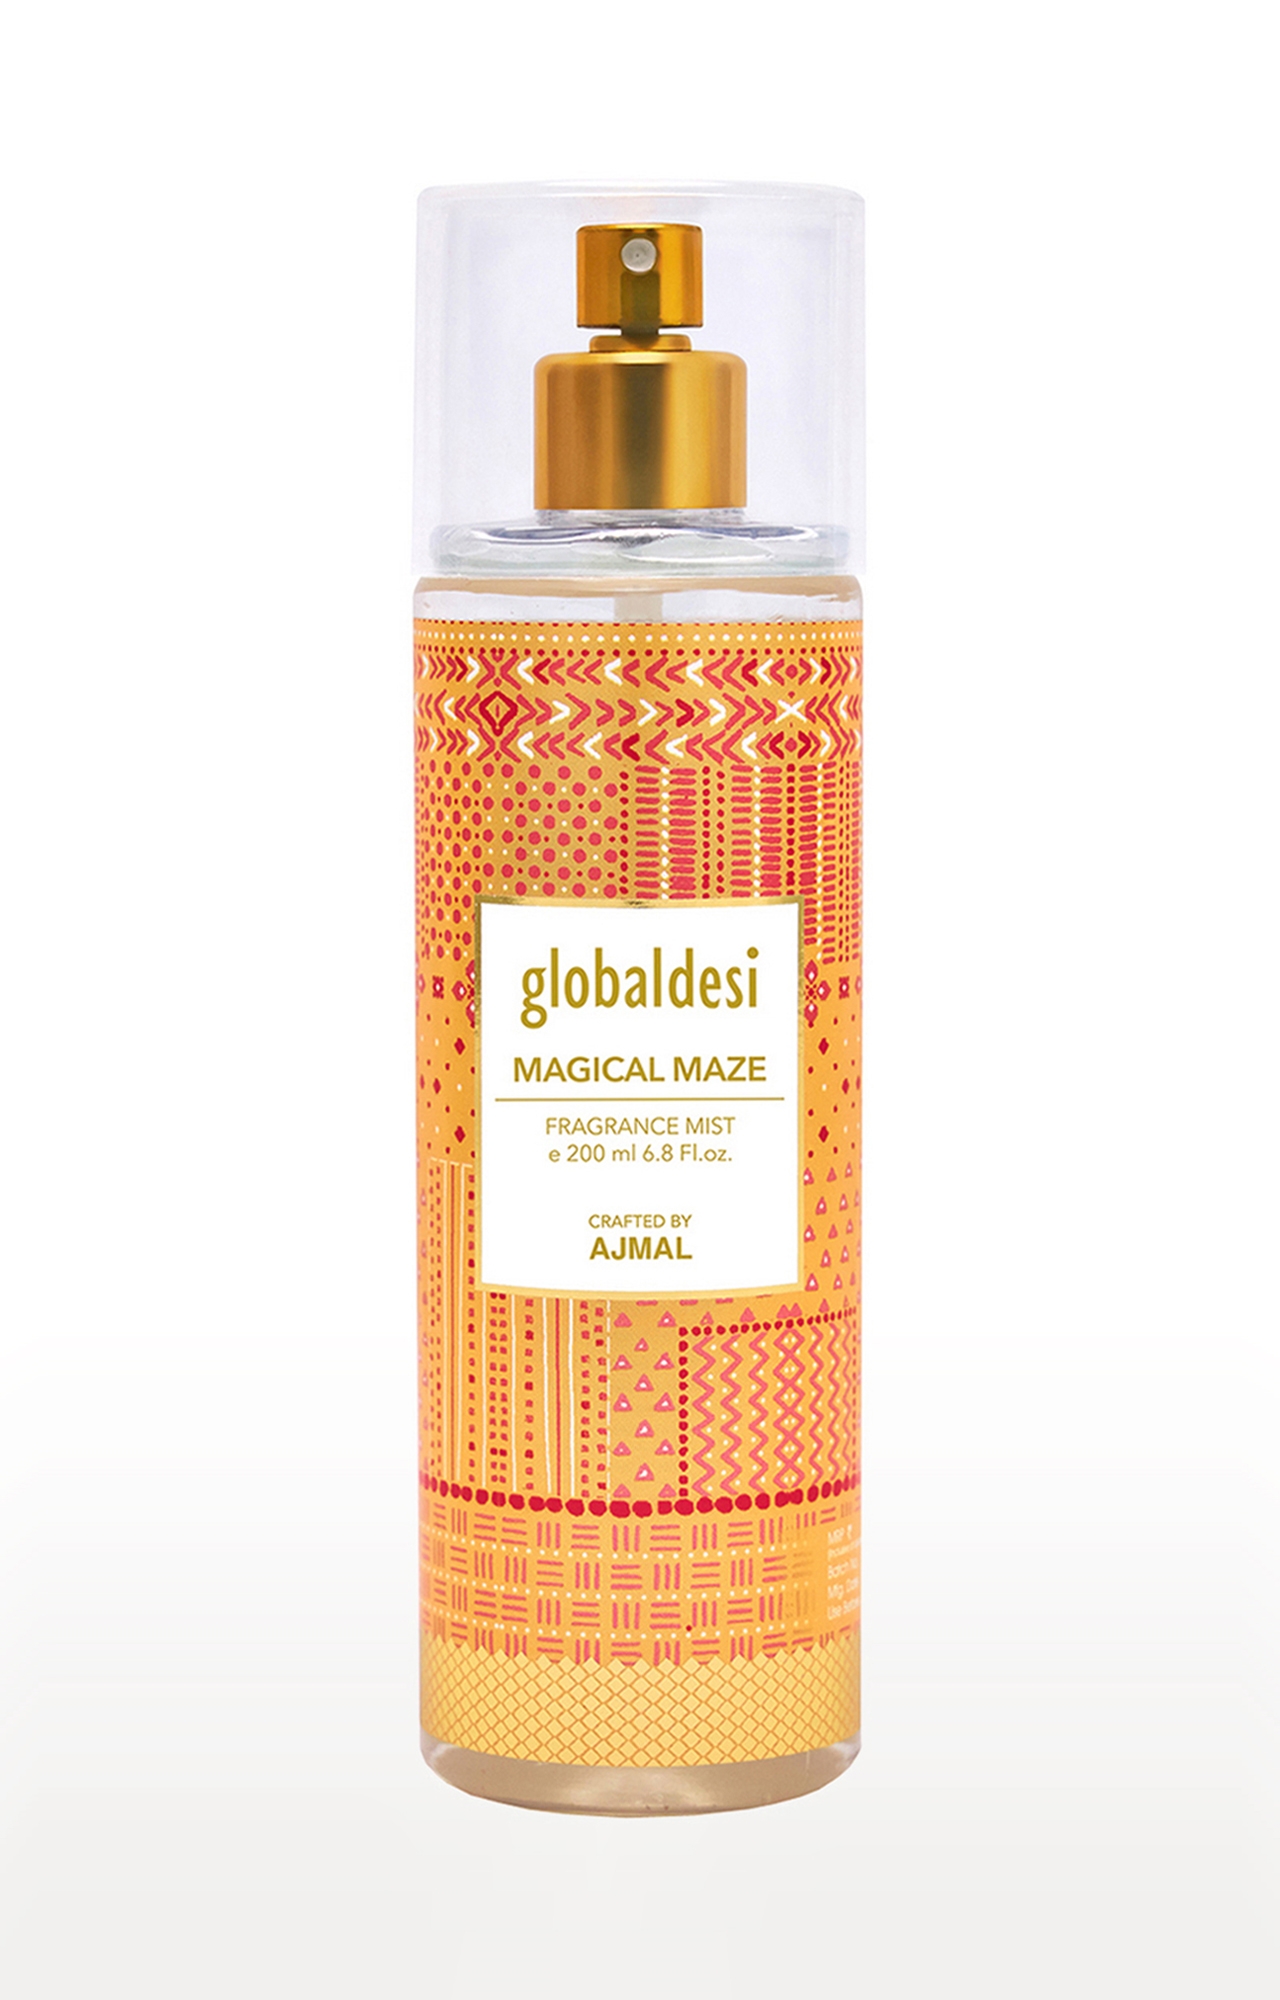 Global Desi Crafted By Ajmal | Global Desi Magical Maze Body Mist Perfume 200ML Long Lasting Scent Spray Gift For Women Crafted by Ajmal  0